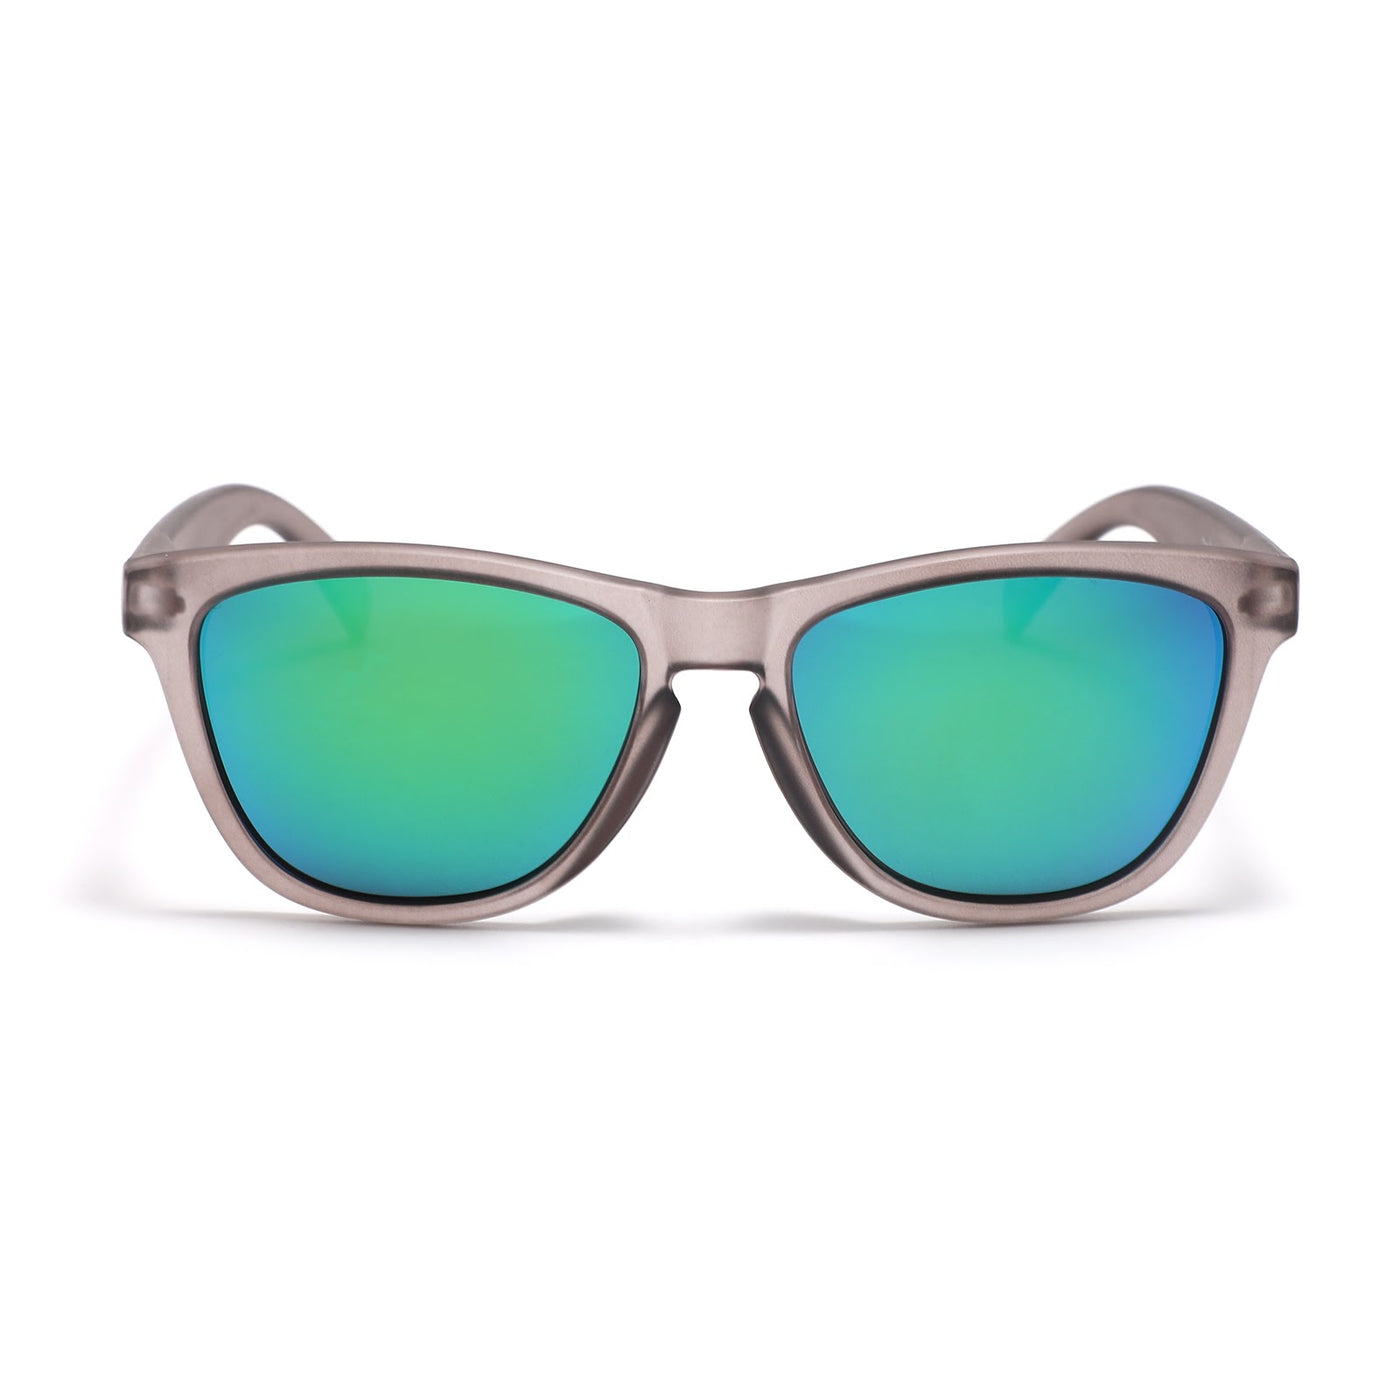 picture of rincon-1-grey-frame-blue-lens